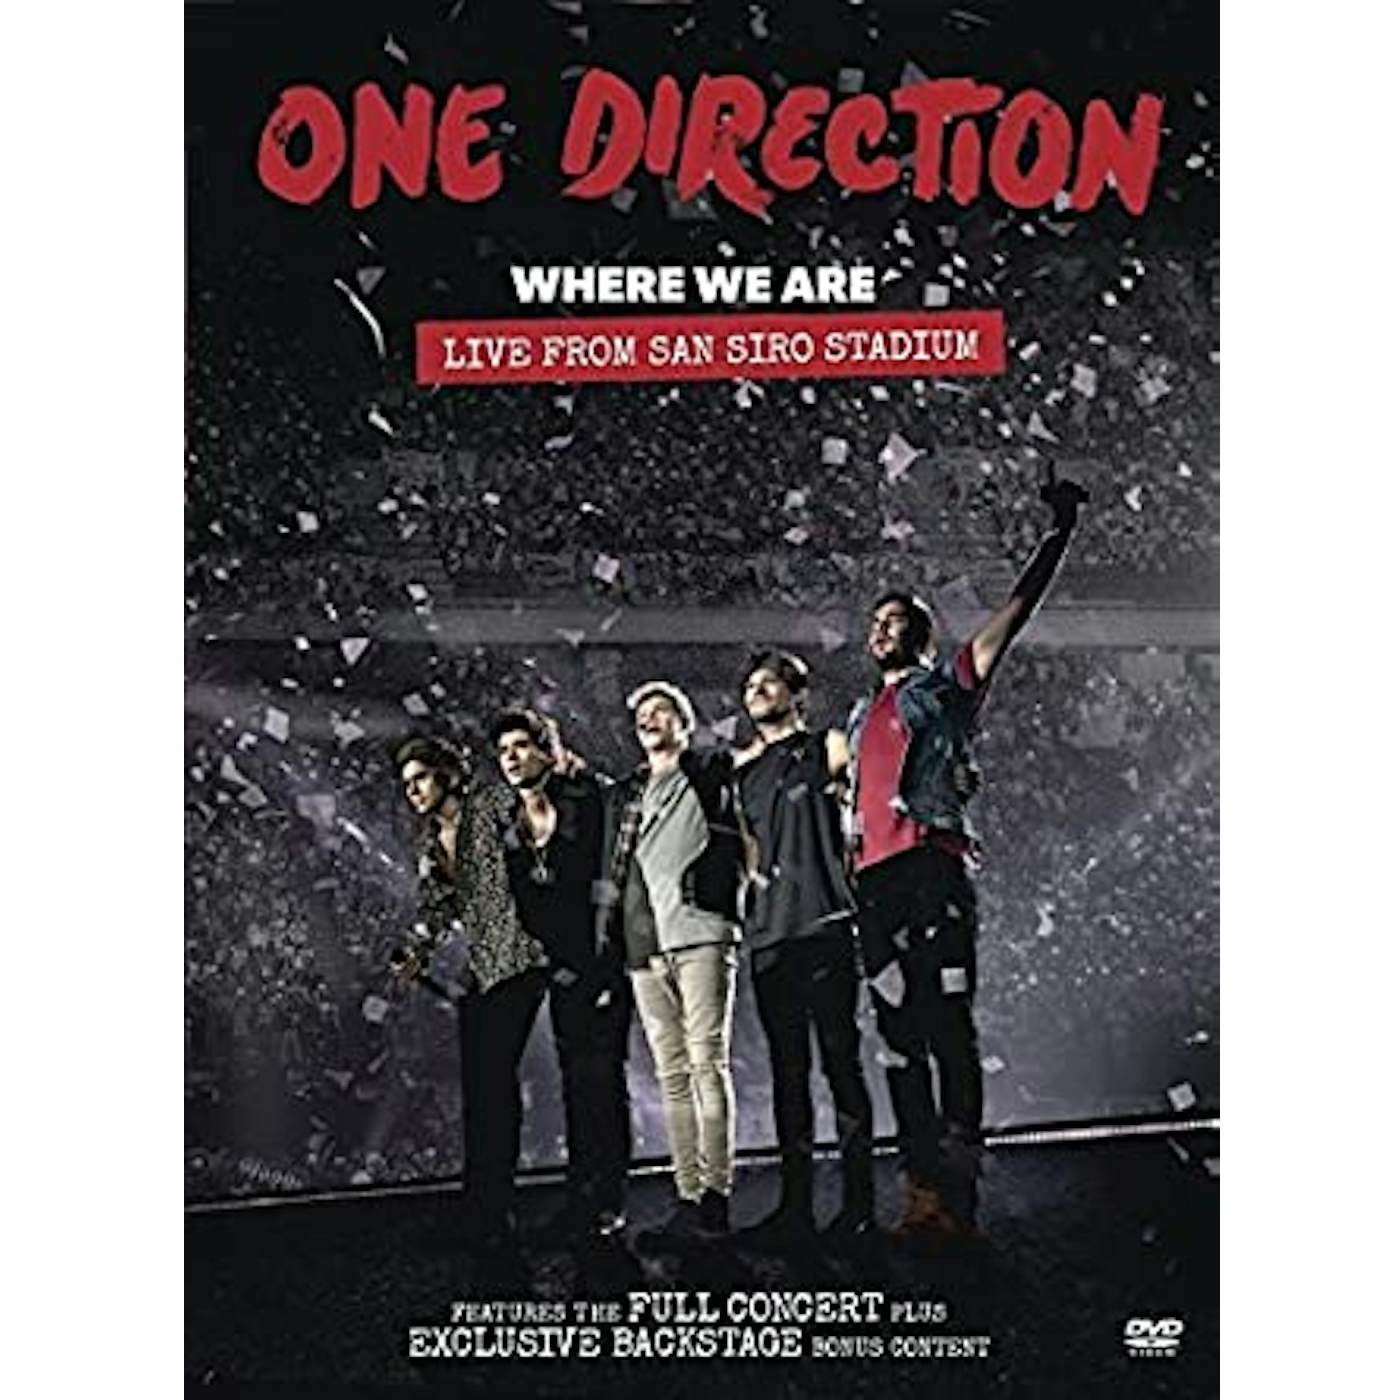 One Direction - Where We Are: Live From San Sirio Stadium